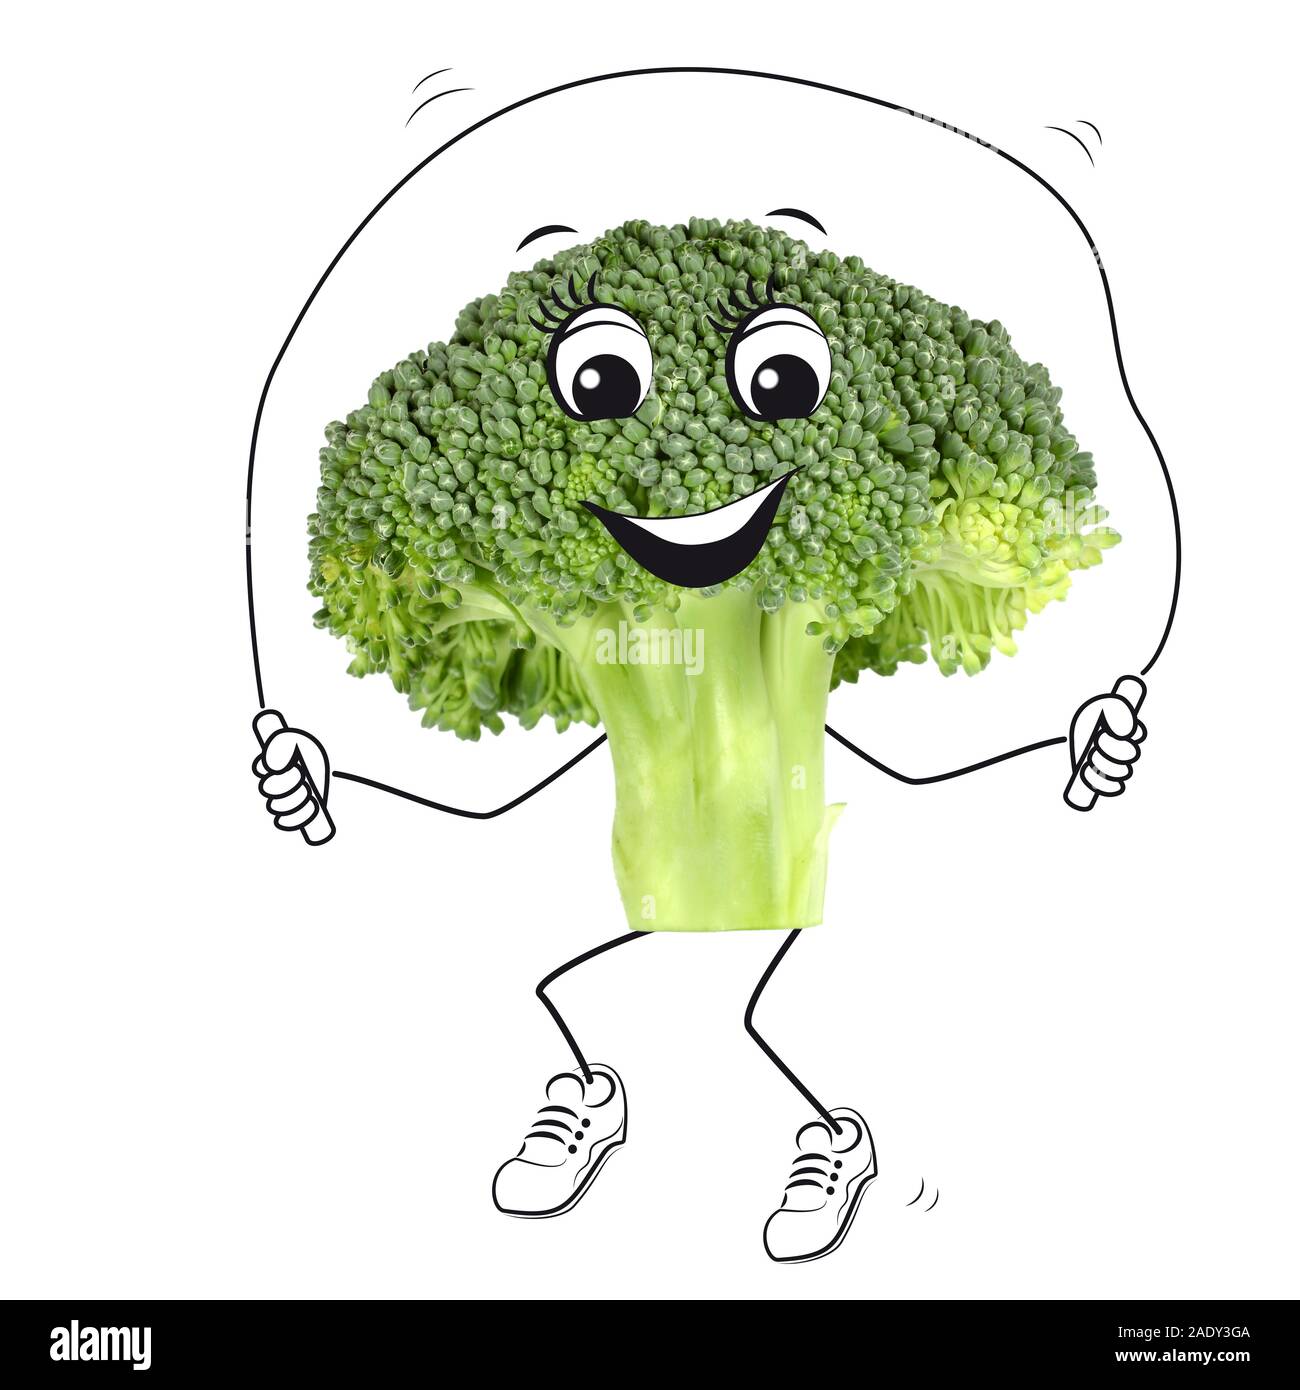 Sporting broccoli with cartoon characters Stock Photo